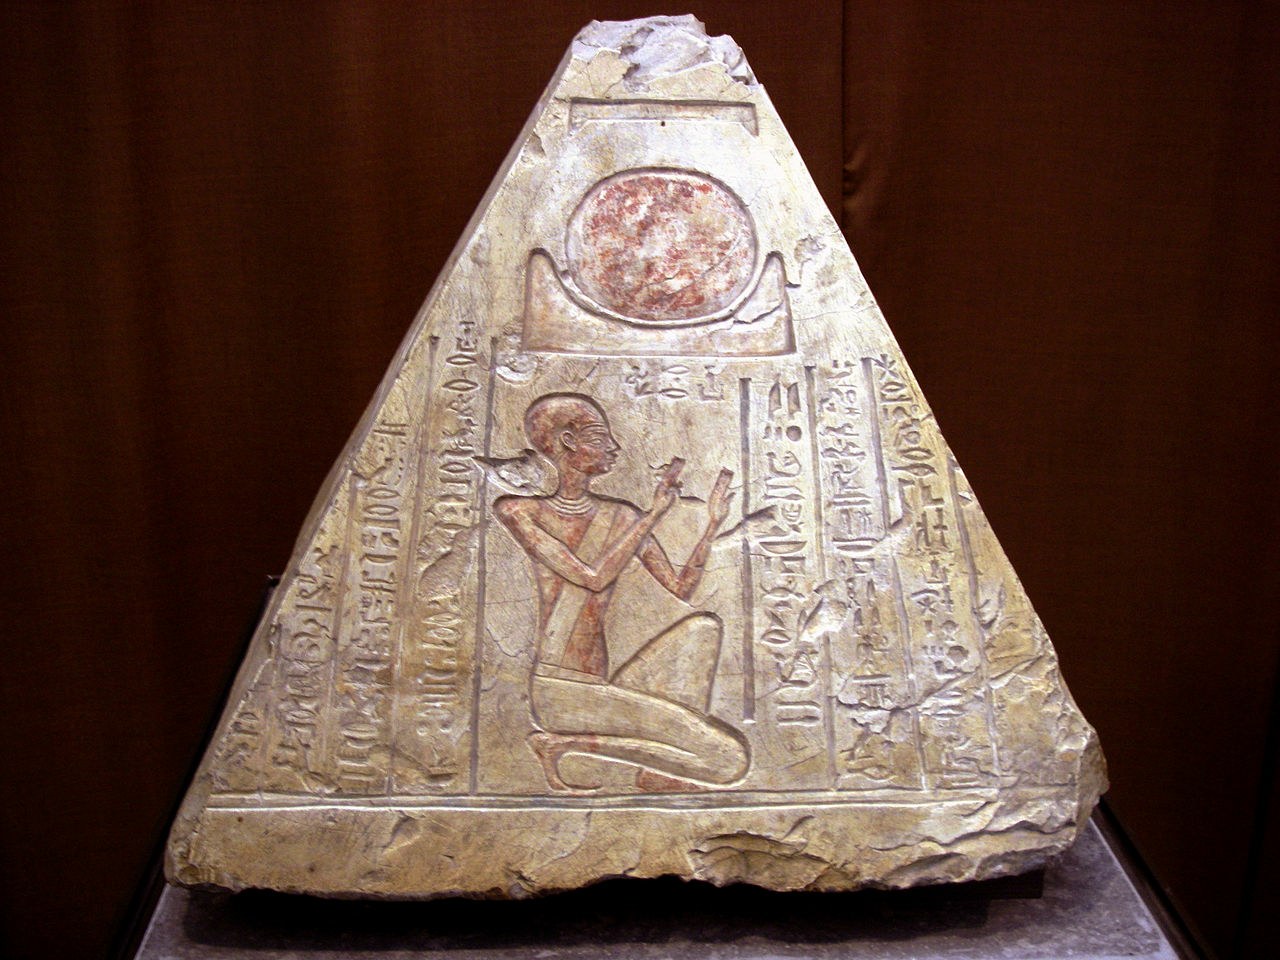 Ancient telegraph: Light signals used for communication in ancient Egypt? 1